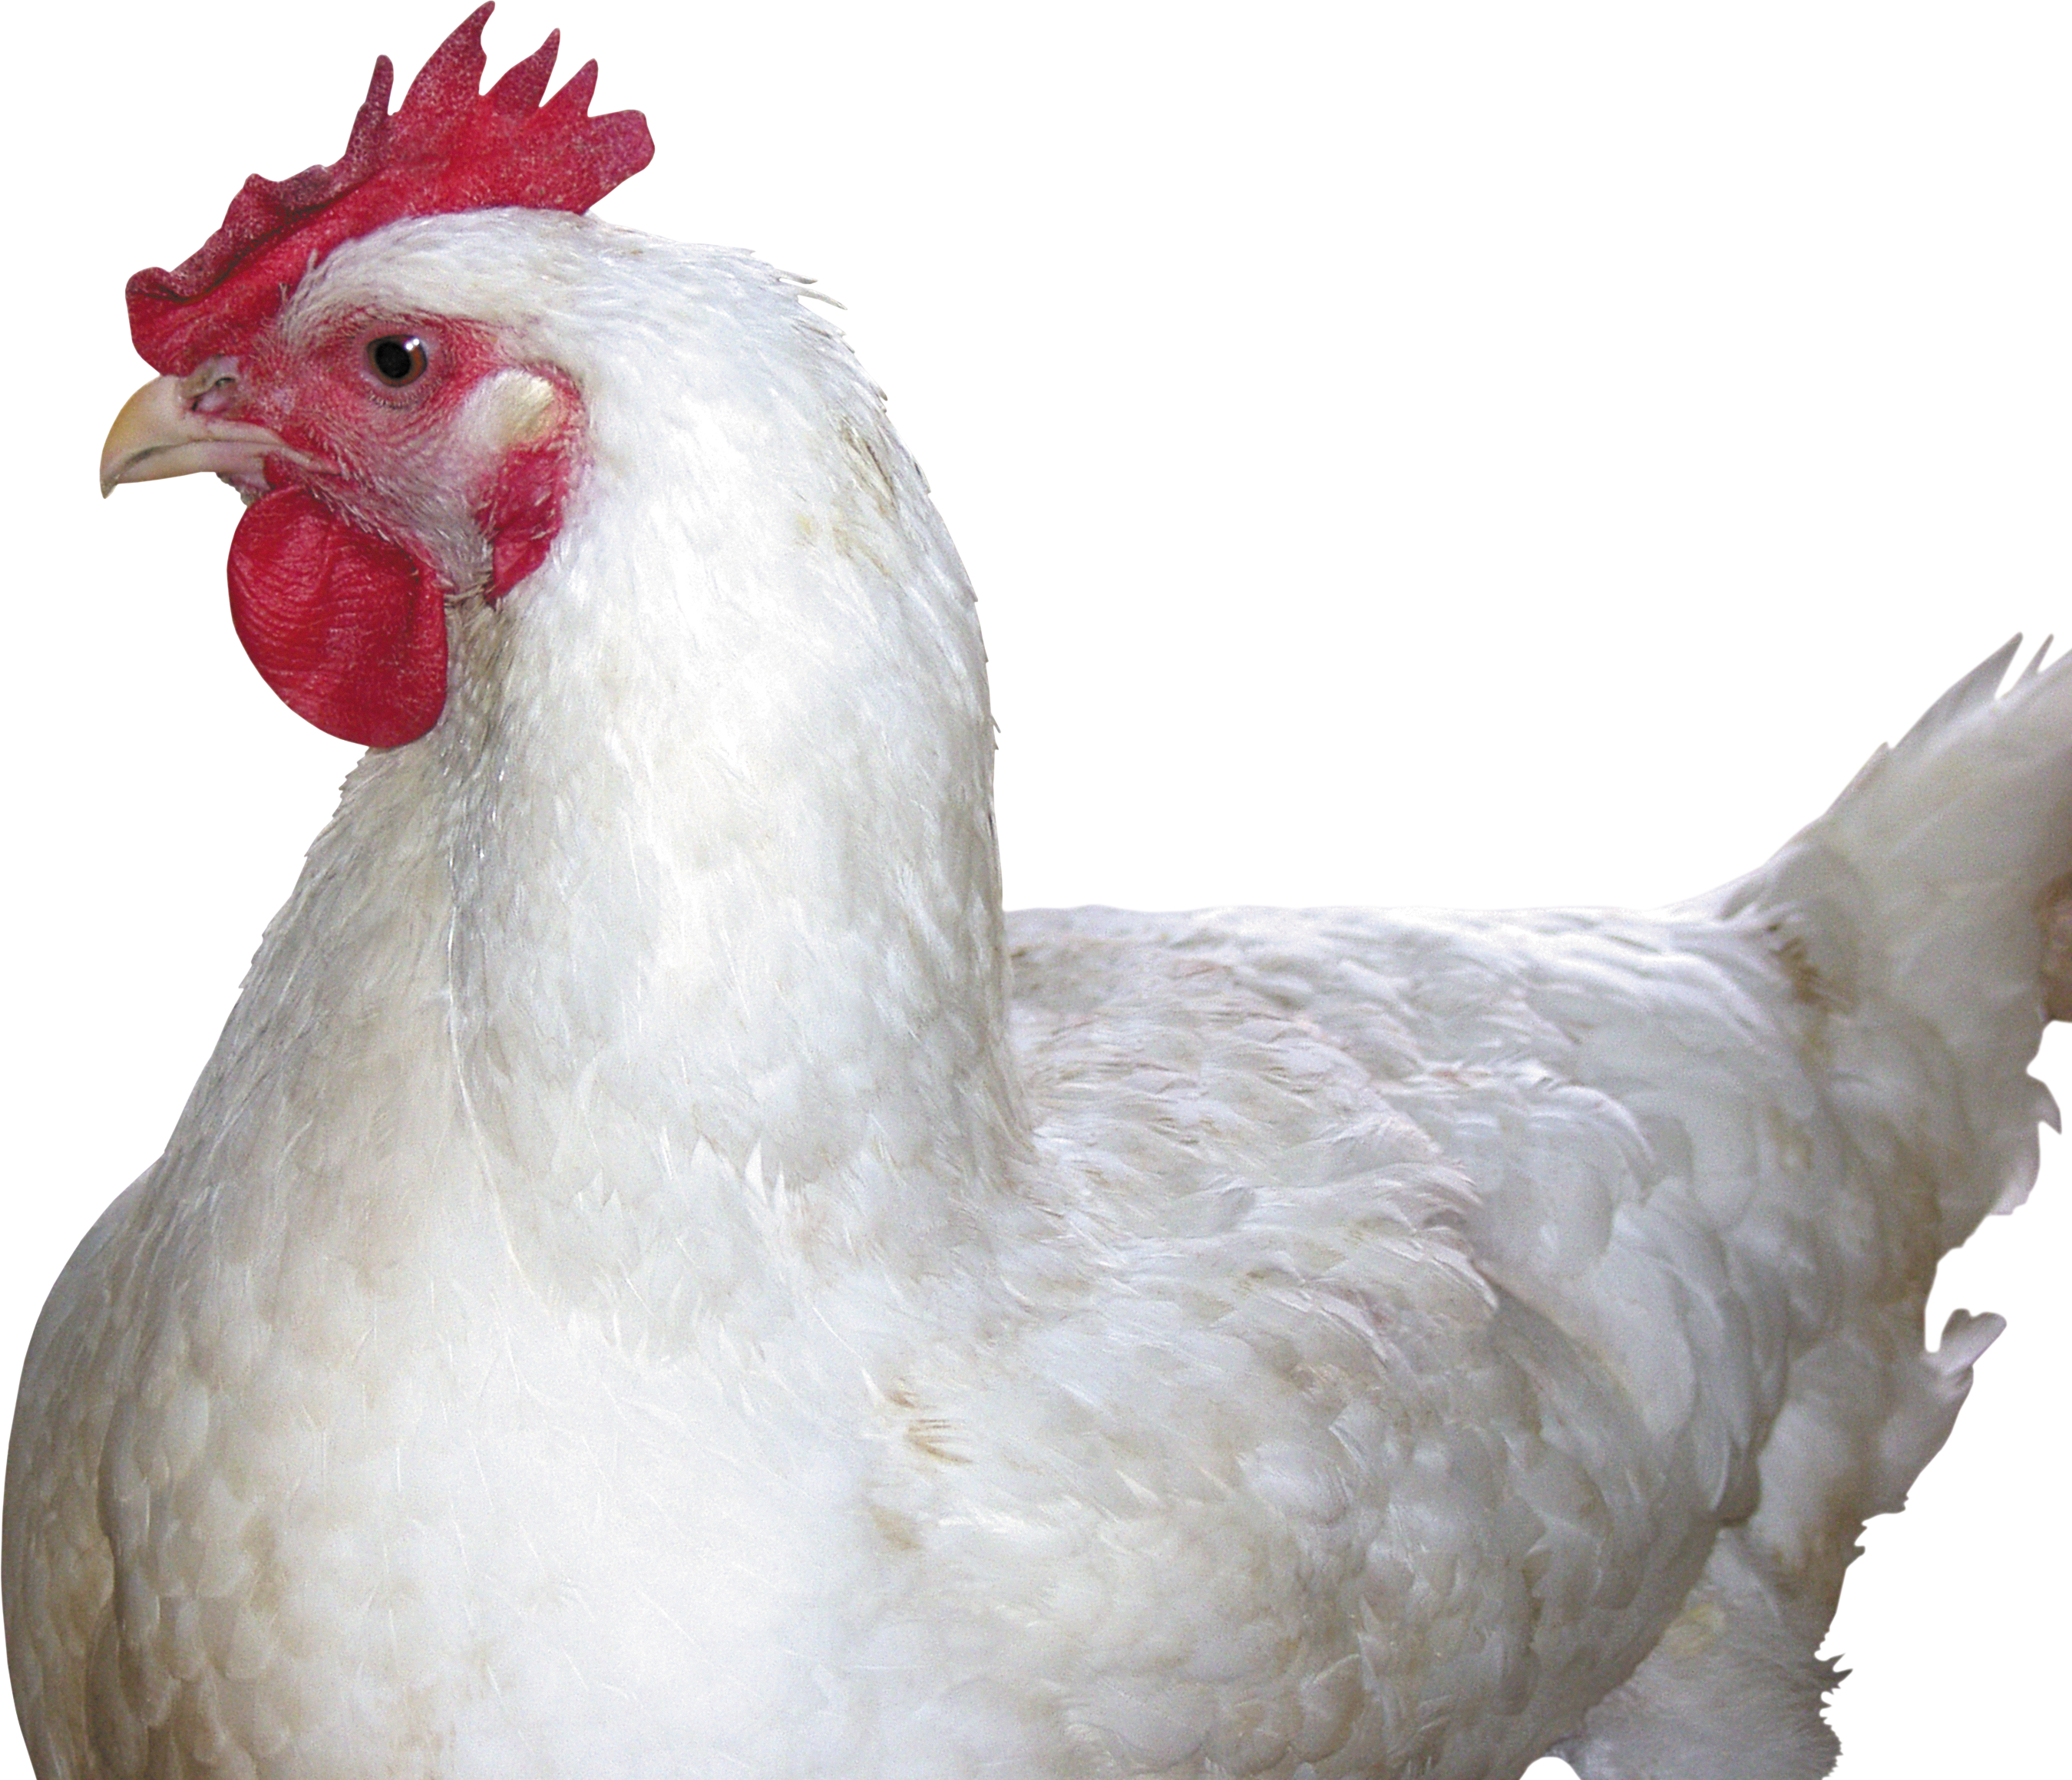 Chicken PNG image. Image from